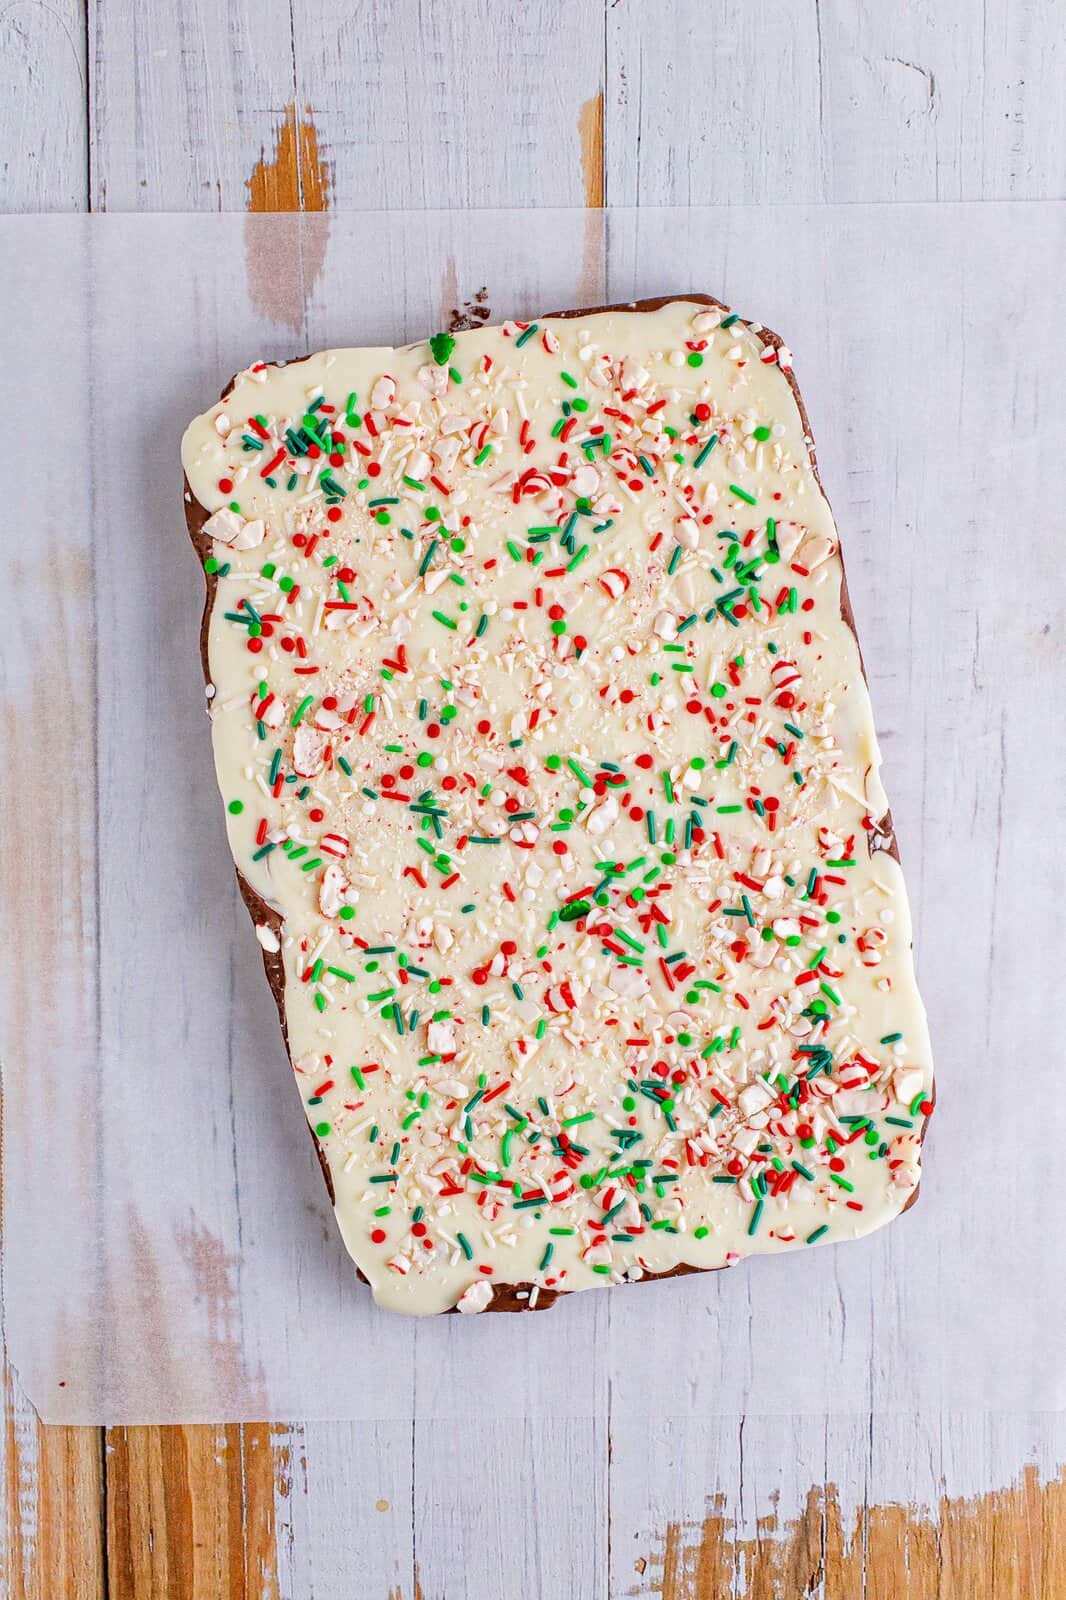 peppermint bark before being broken into pieces.